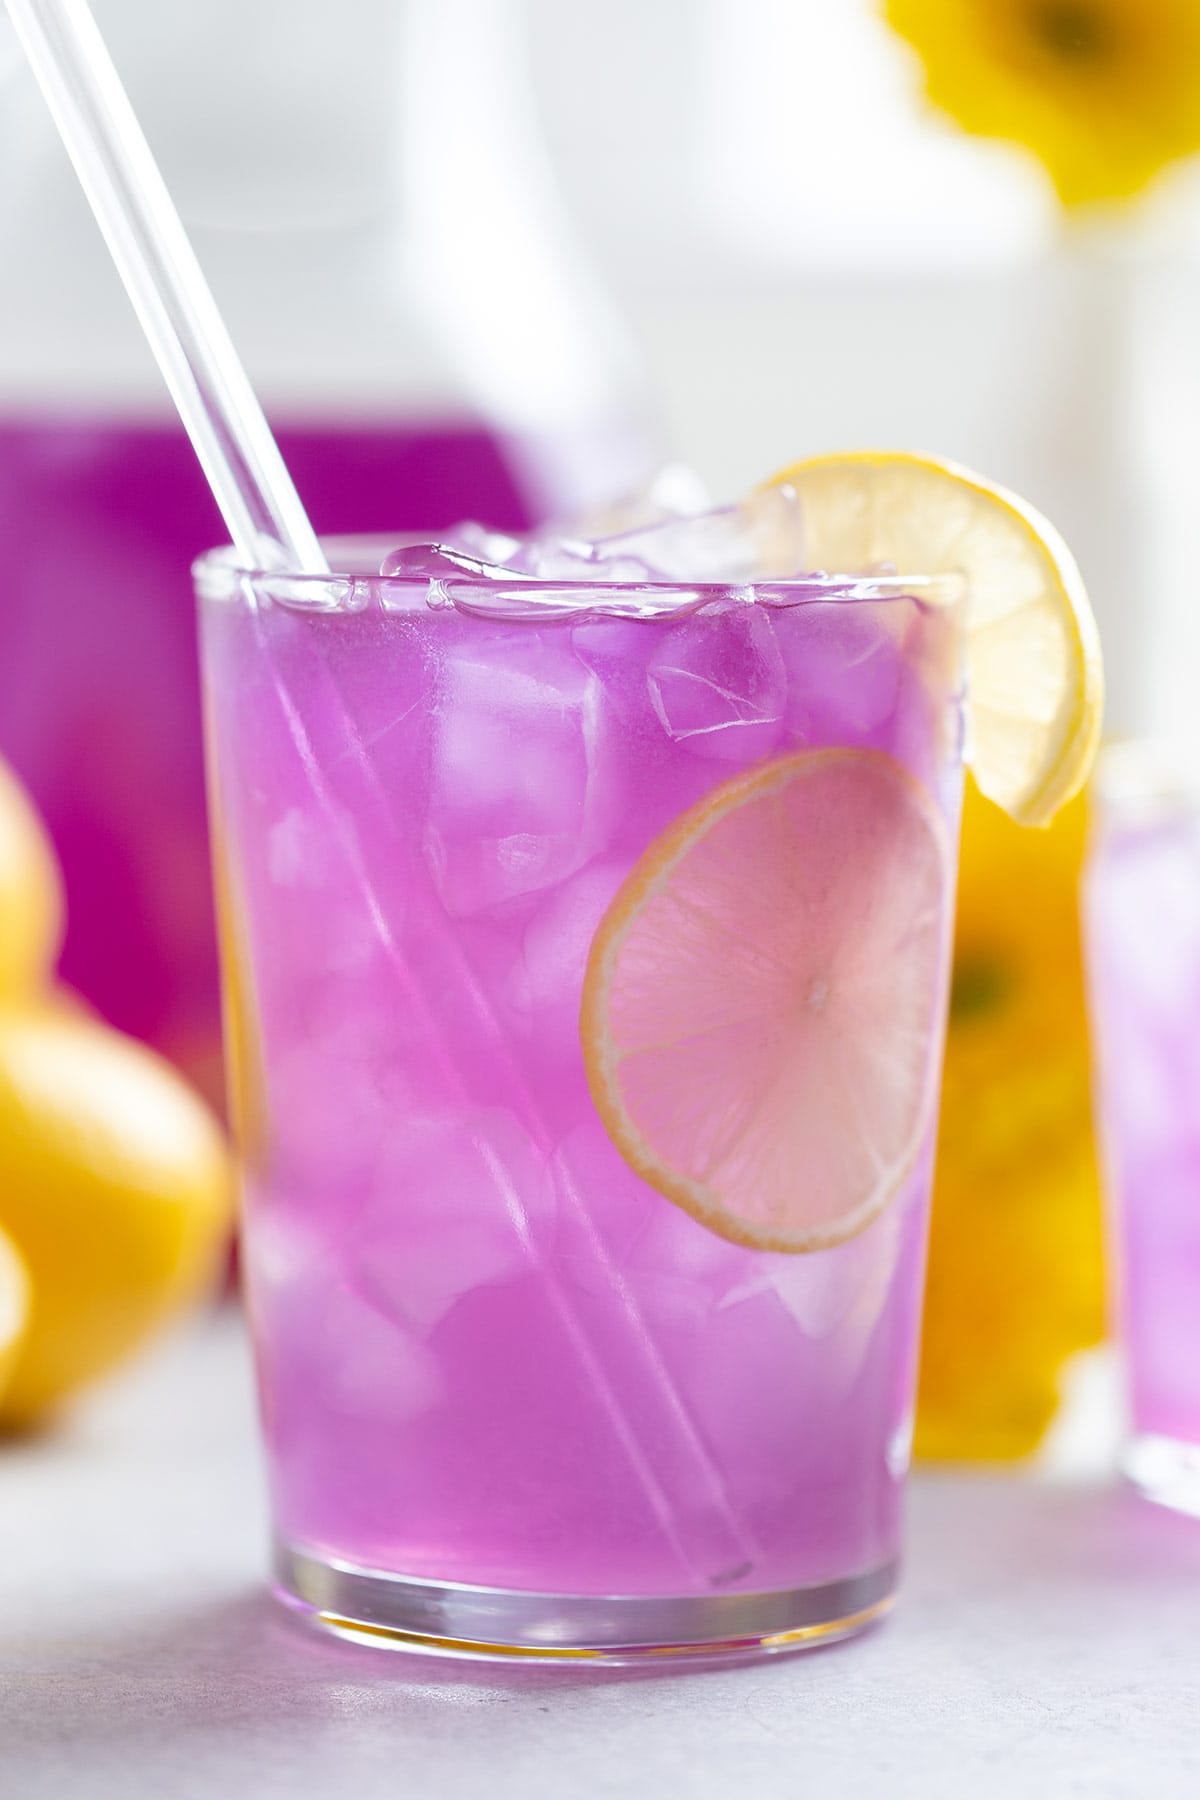 Bright purple lemonade in a tall glass with ice garnished with lemon slices and a glass straw.